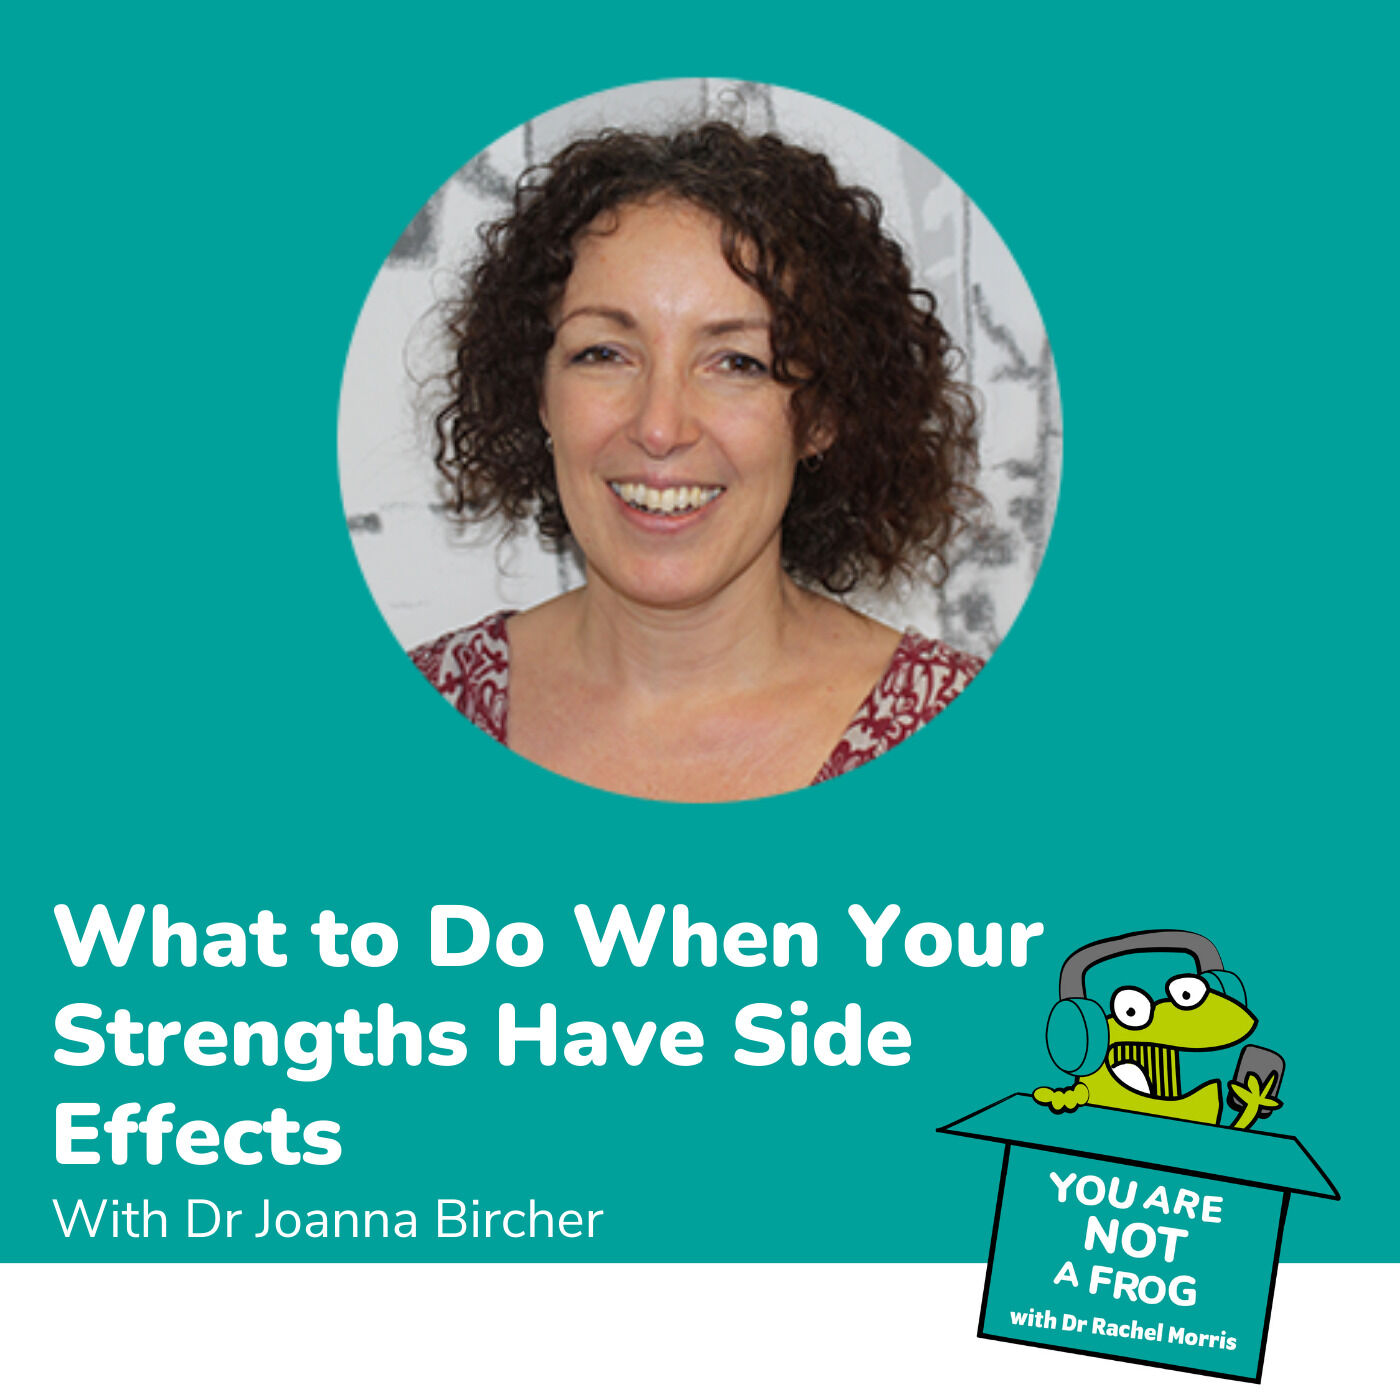 What to Do When Your Strengths Have Side Effects with Dr Joanna Bircher